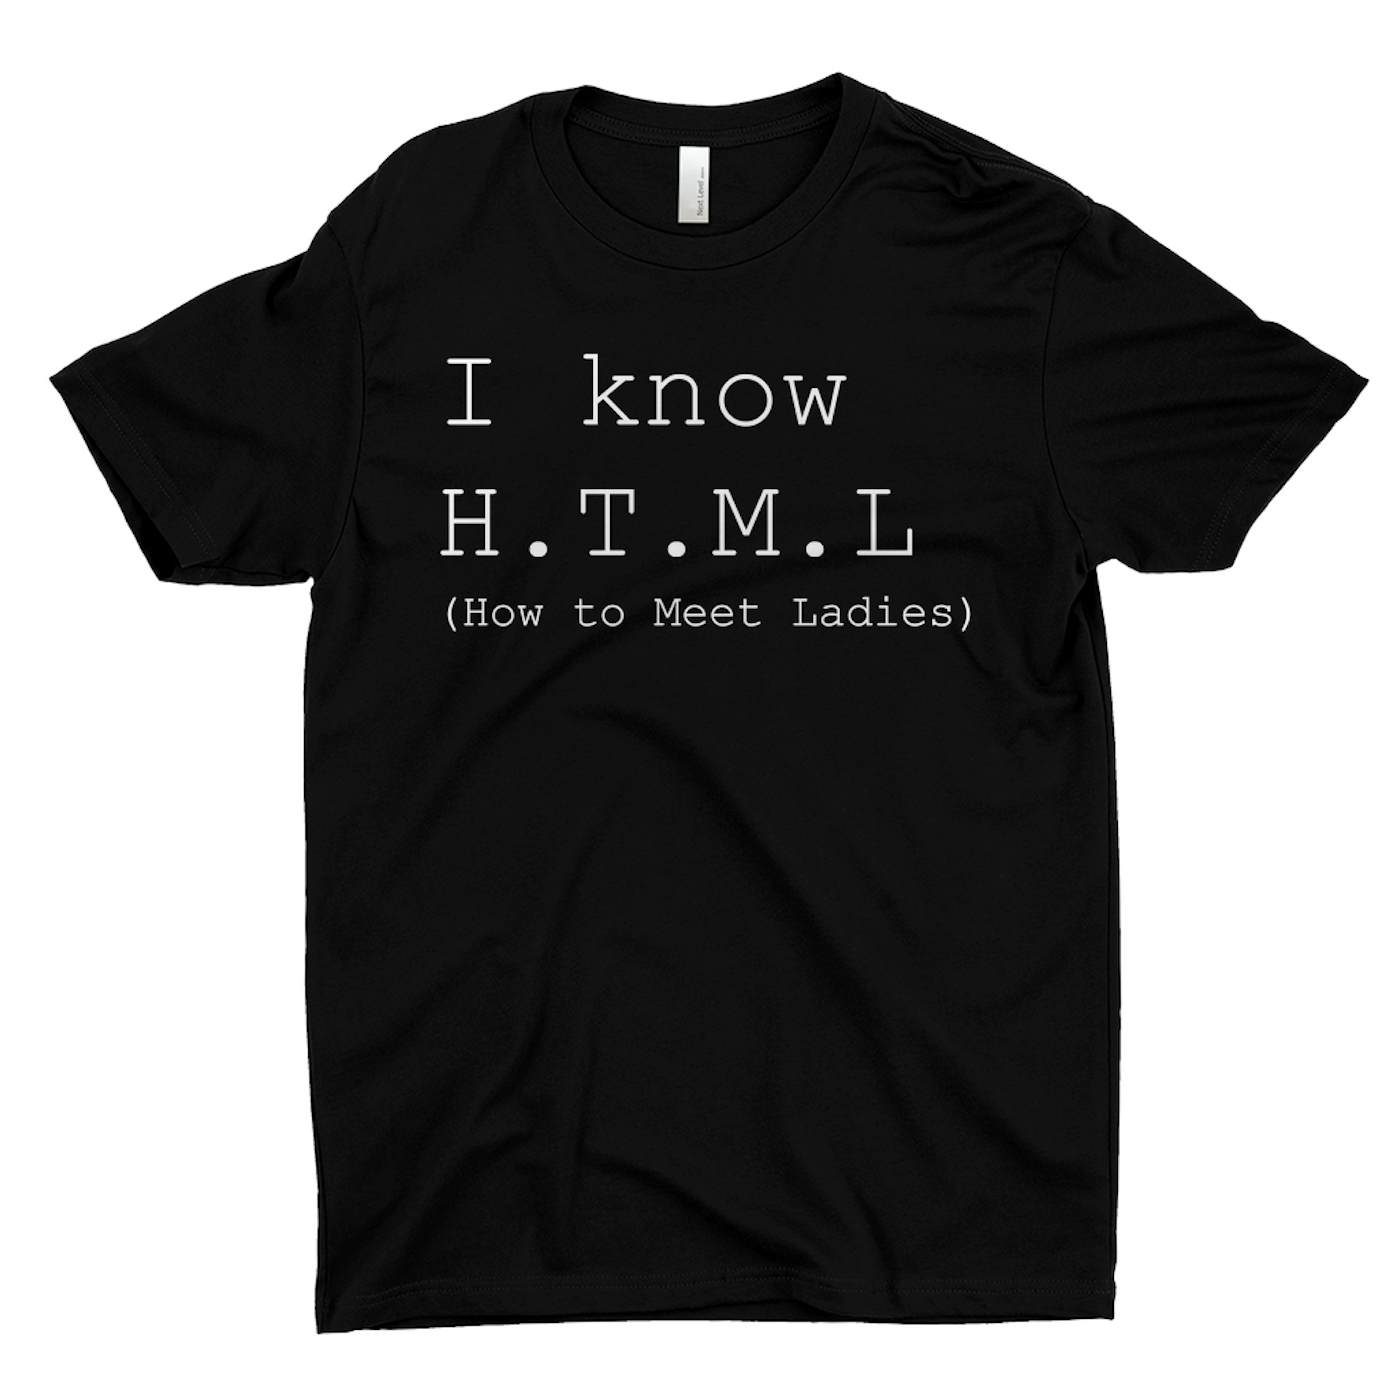 Pop Culture T-Shirt | I Know H.T.M.L. Inspired By Silicon Valley Pop Culture Shirt